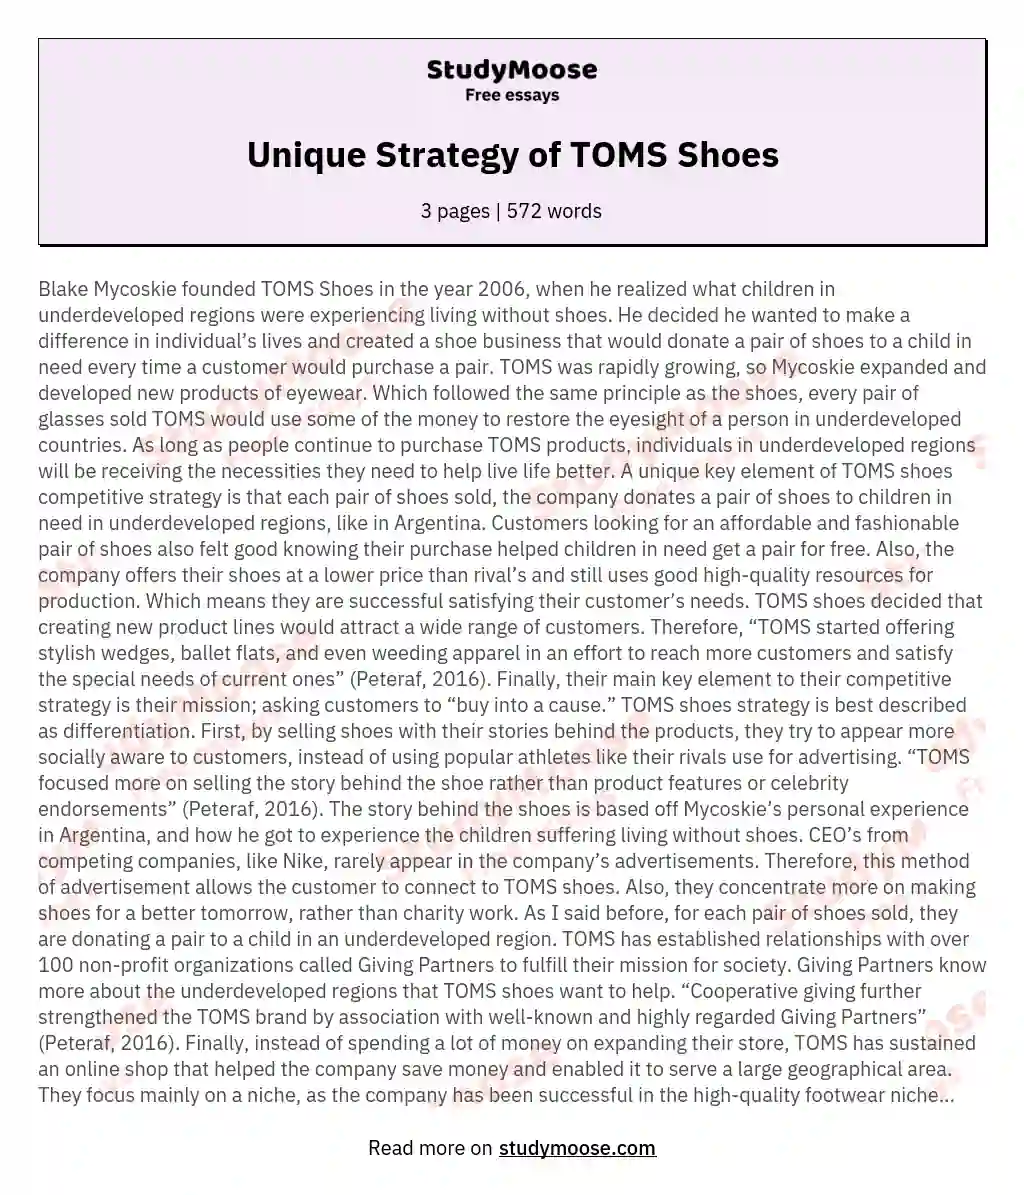 Why Are Toms Shoes Differentiation Strategy?